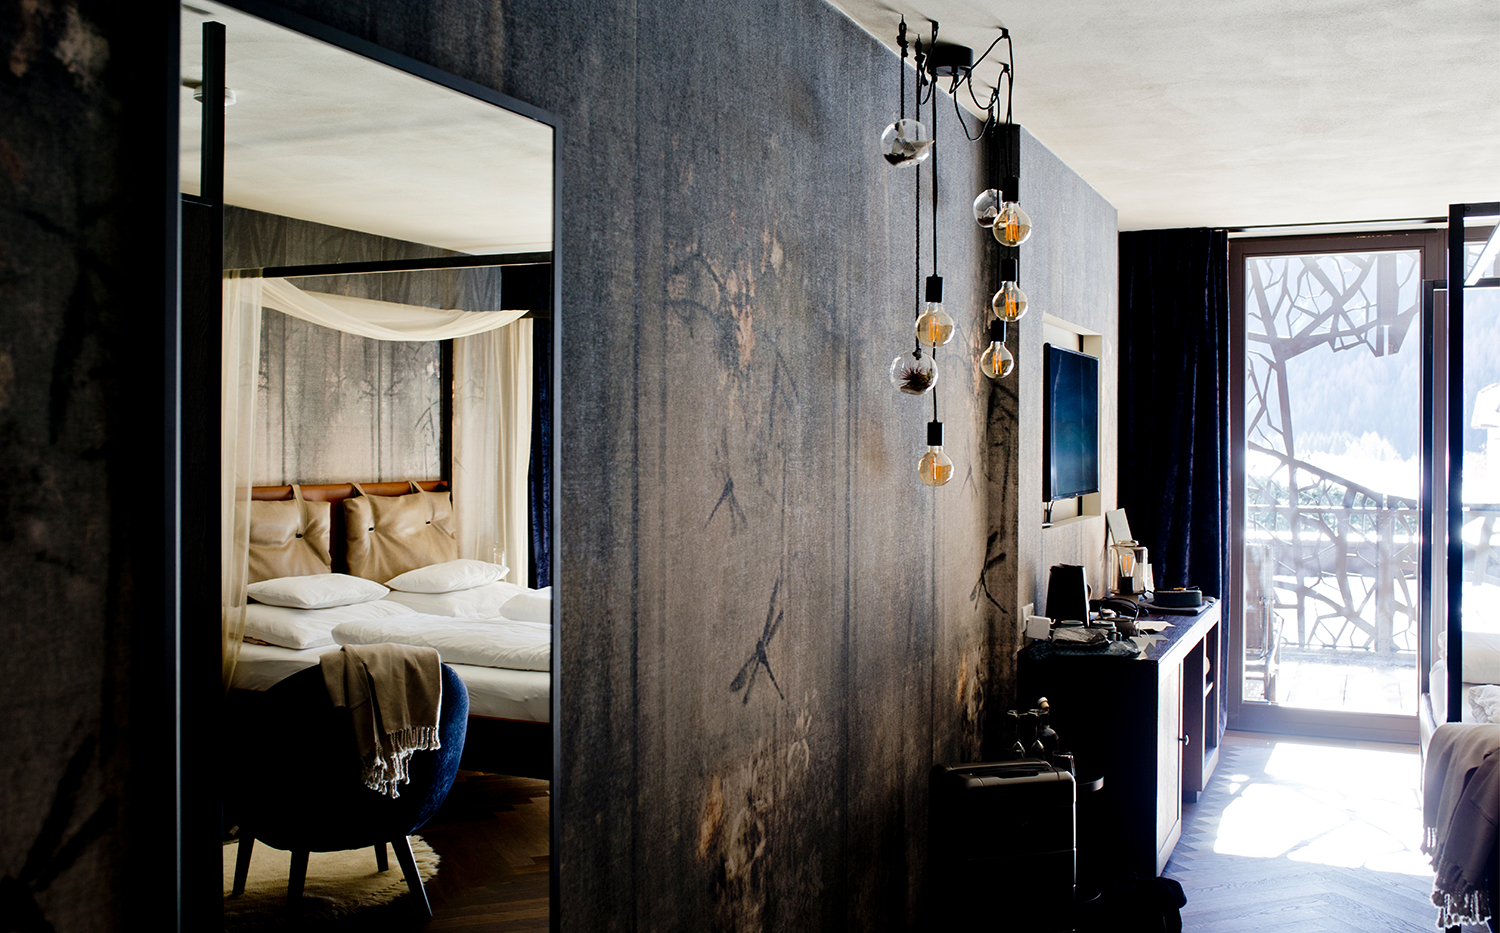 SILENA, the soulful hotel | a hotel architecture & design gem in South Tyrol